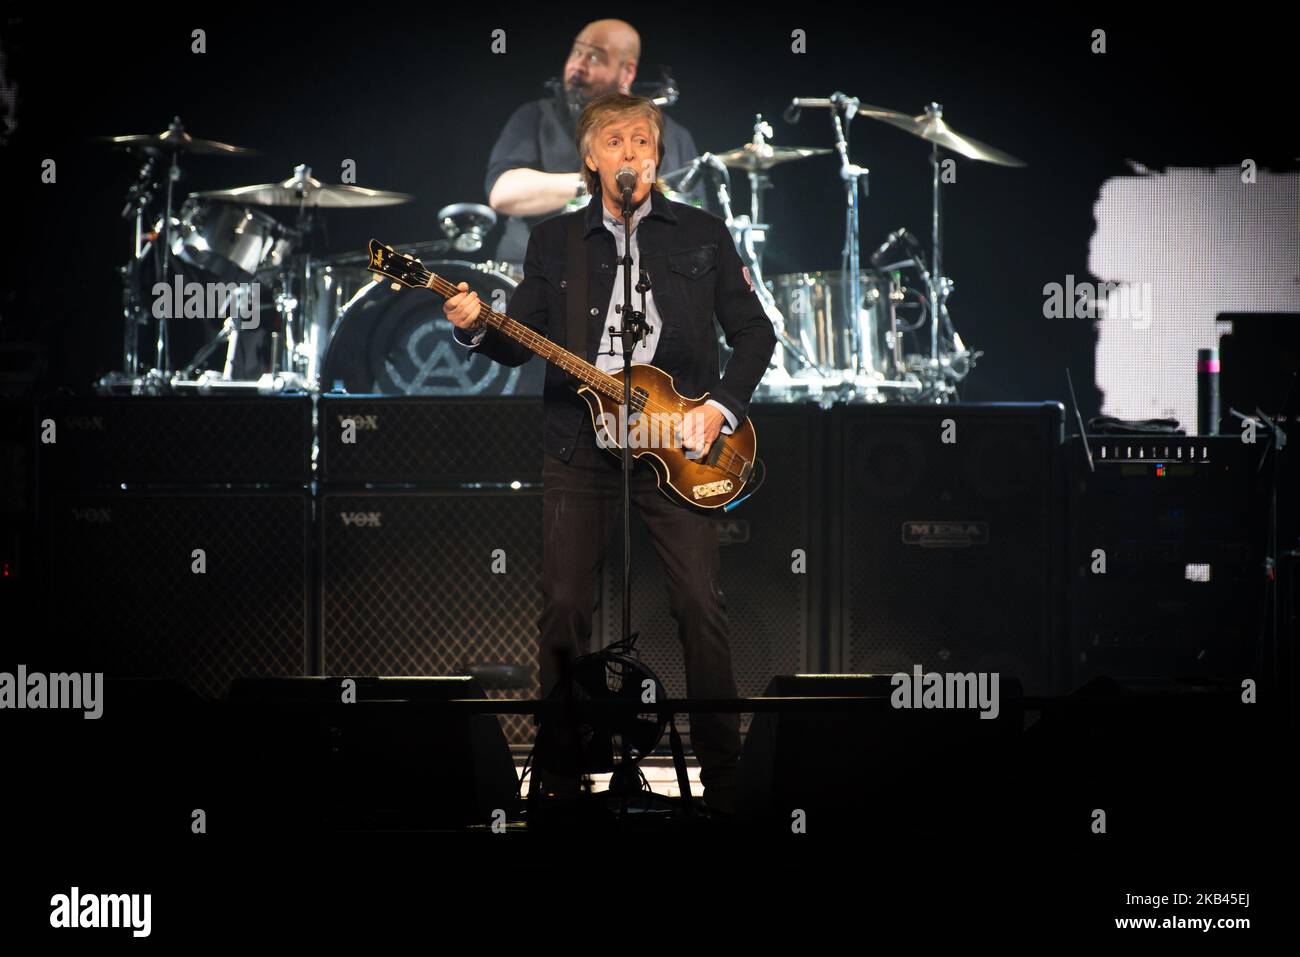 British iconic musician Paul McCartney performs live on stage at The O2 ...